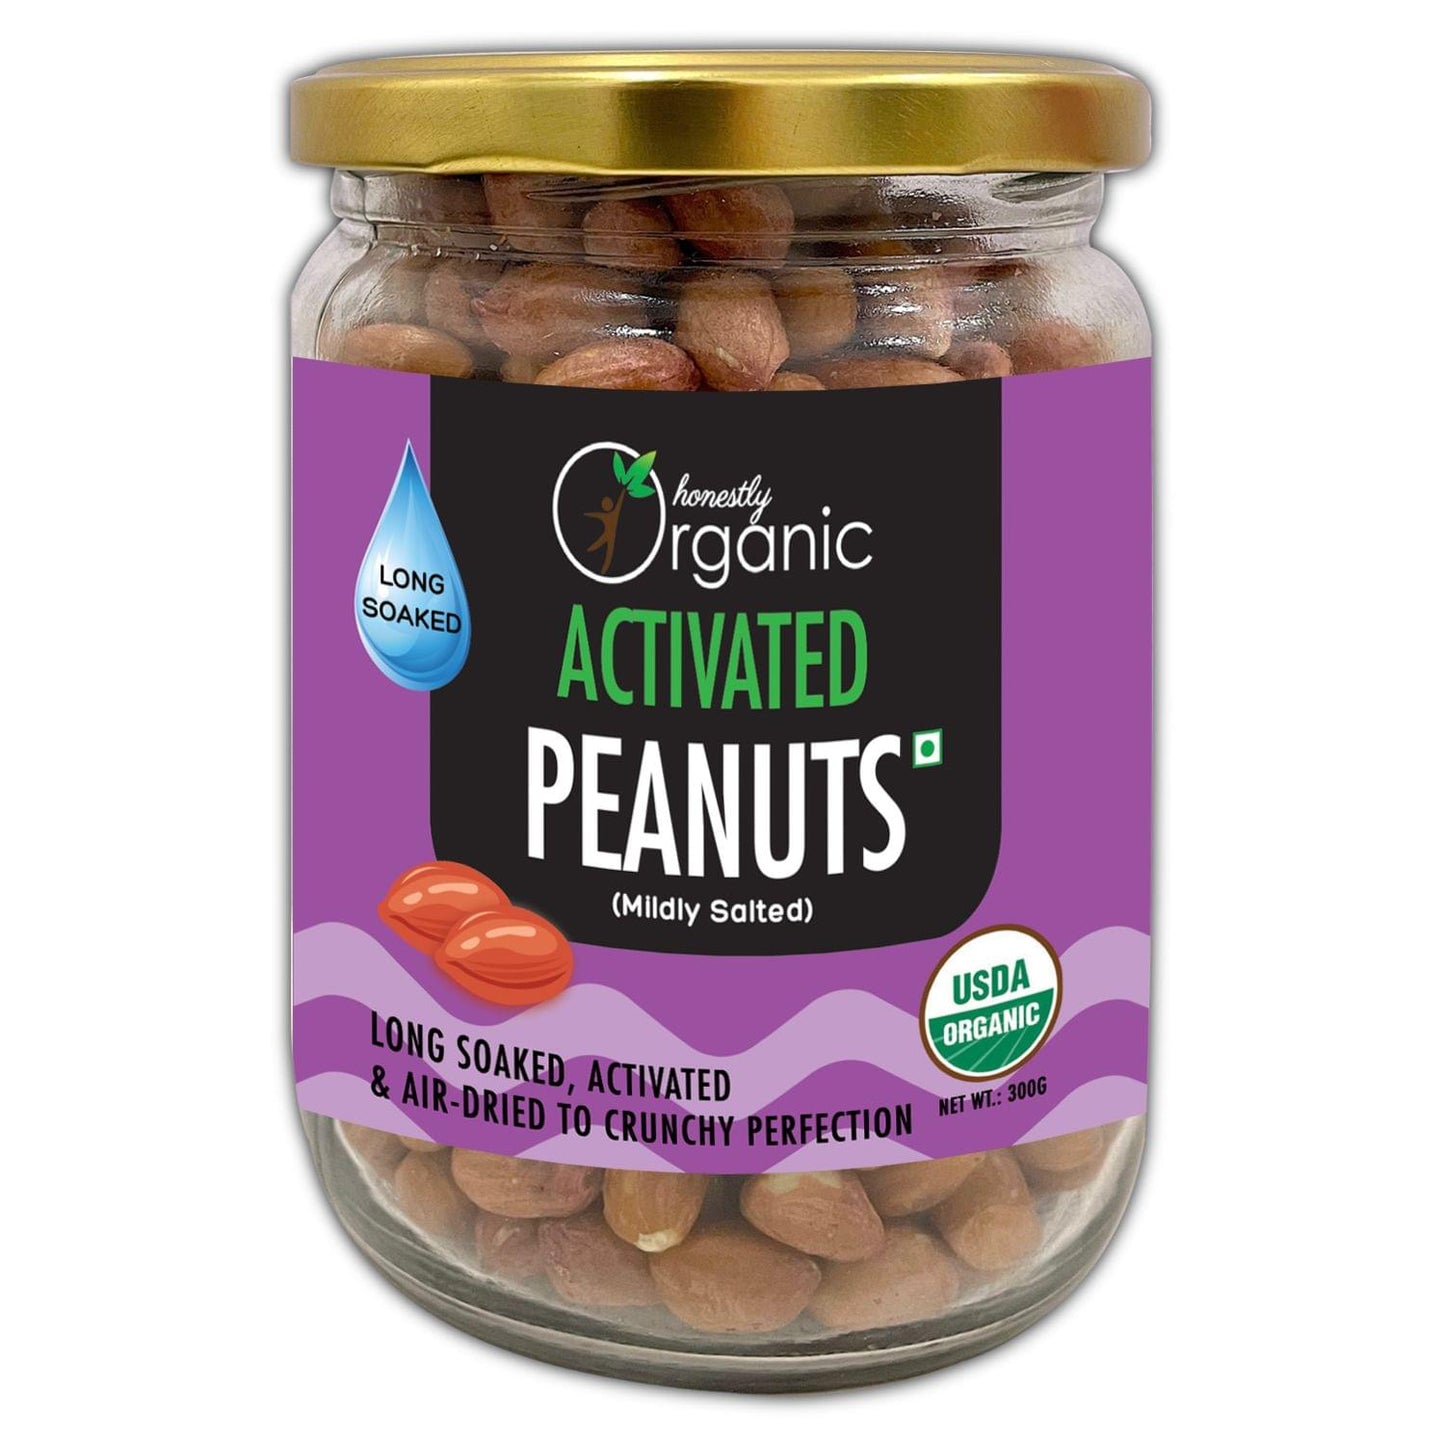 D-Alive Activated Organic Peanuts - Mildly Salted (USDA Organic, Long Soaked & Air Dried to Crunchy Perfection) - 300G